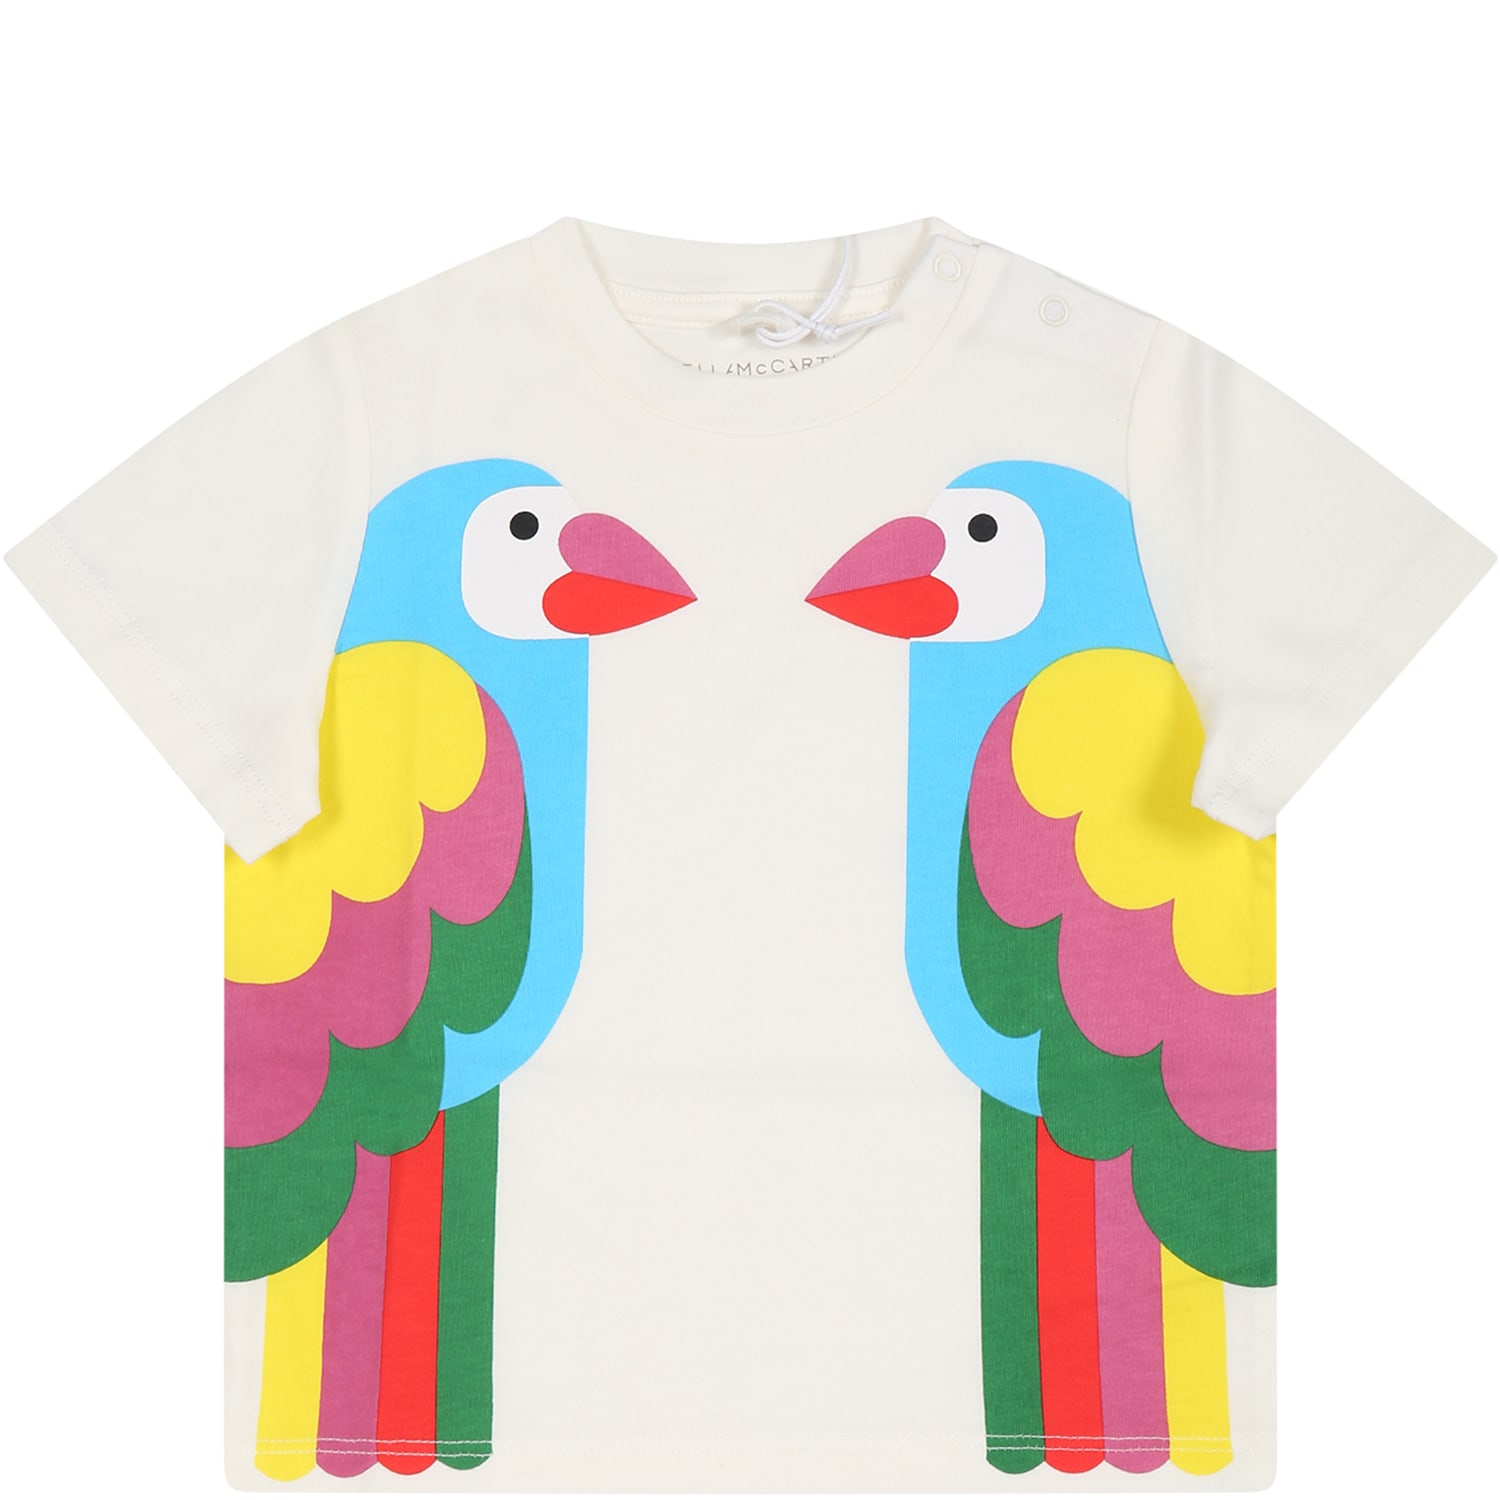 STELLA MCCARTNEY WHITE T-SHIRT FOR BABY GIRL WITH PARROTS PRINT